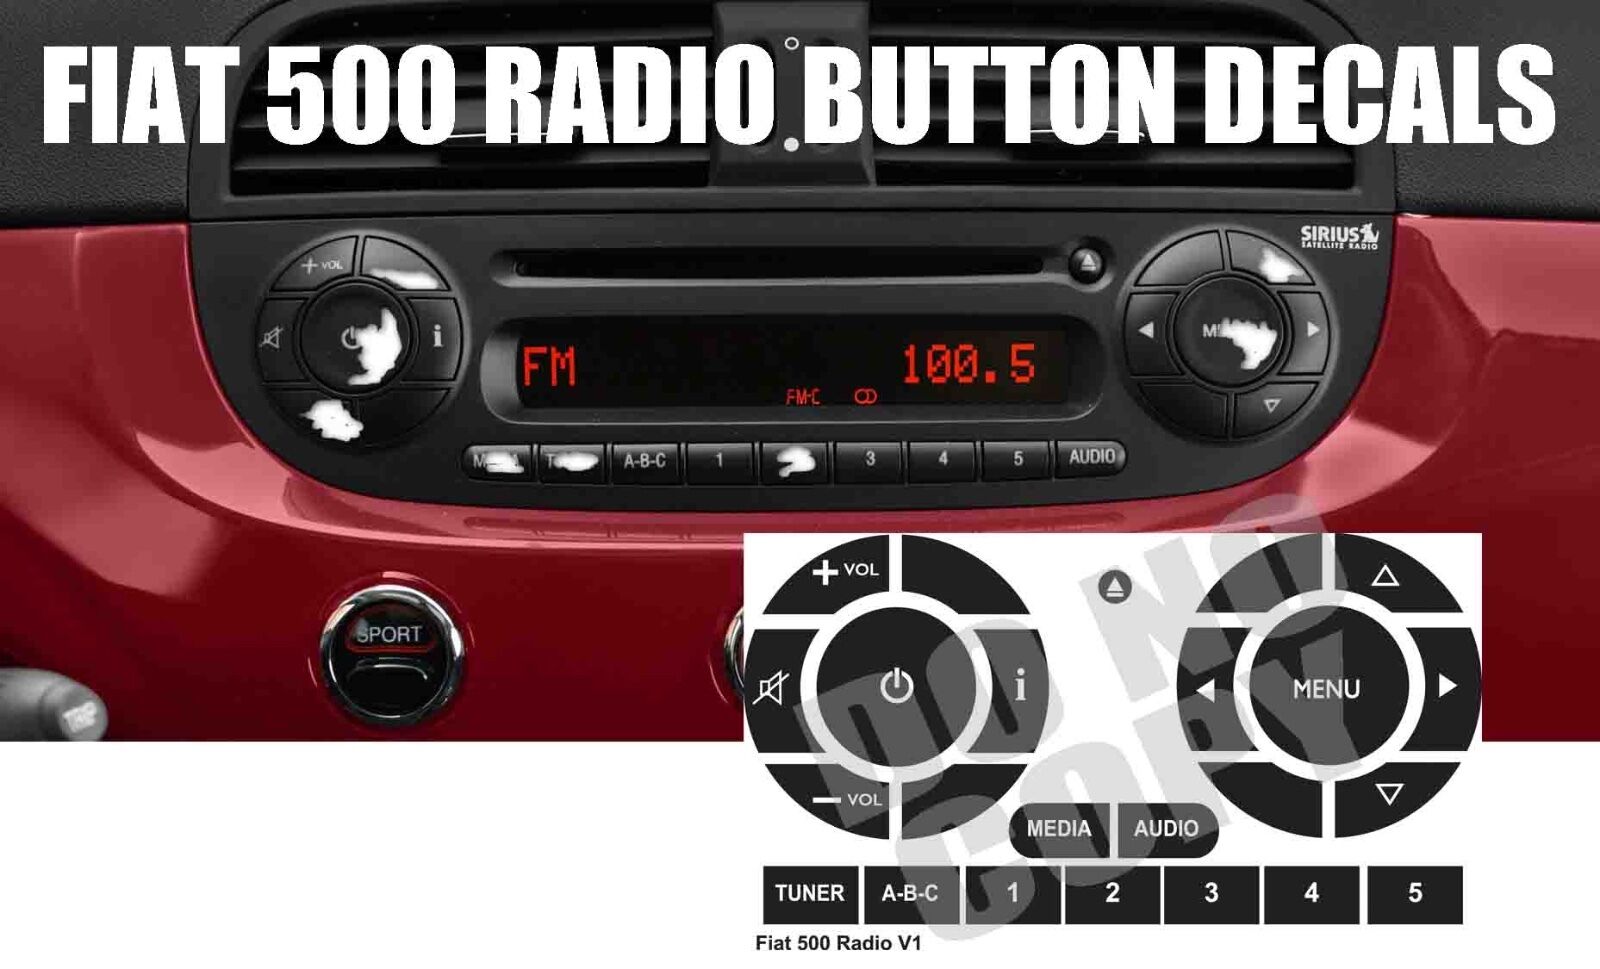 Fits FIAT 500 RADIO STEREO WORN PEELING BUTTON REPAIR DECALS STICKERS